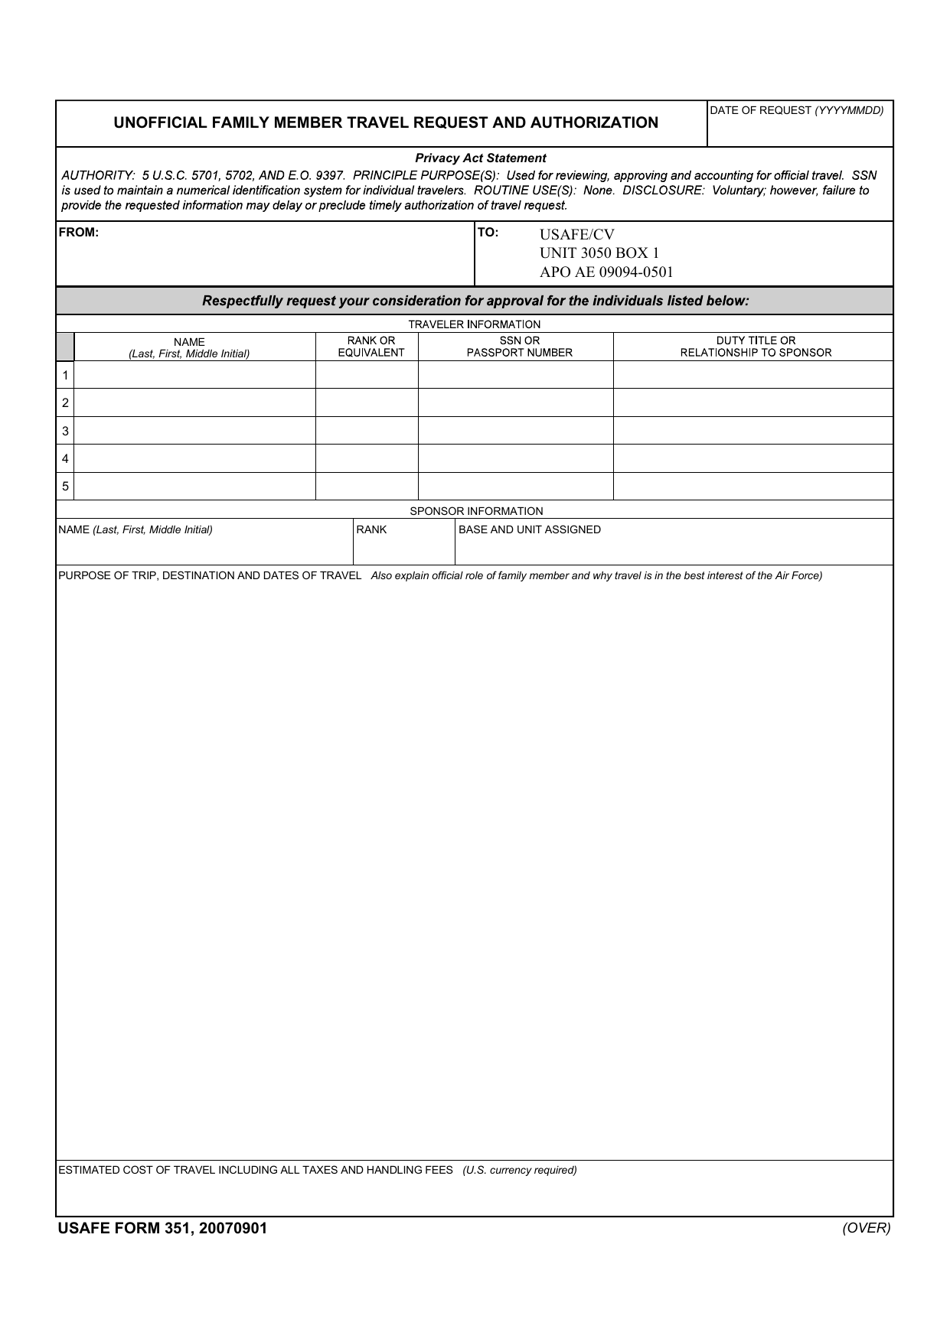 USAFE Form 351 Unofficial Family Member Travel Request and Authorization, Page 1